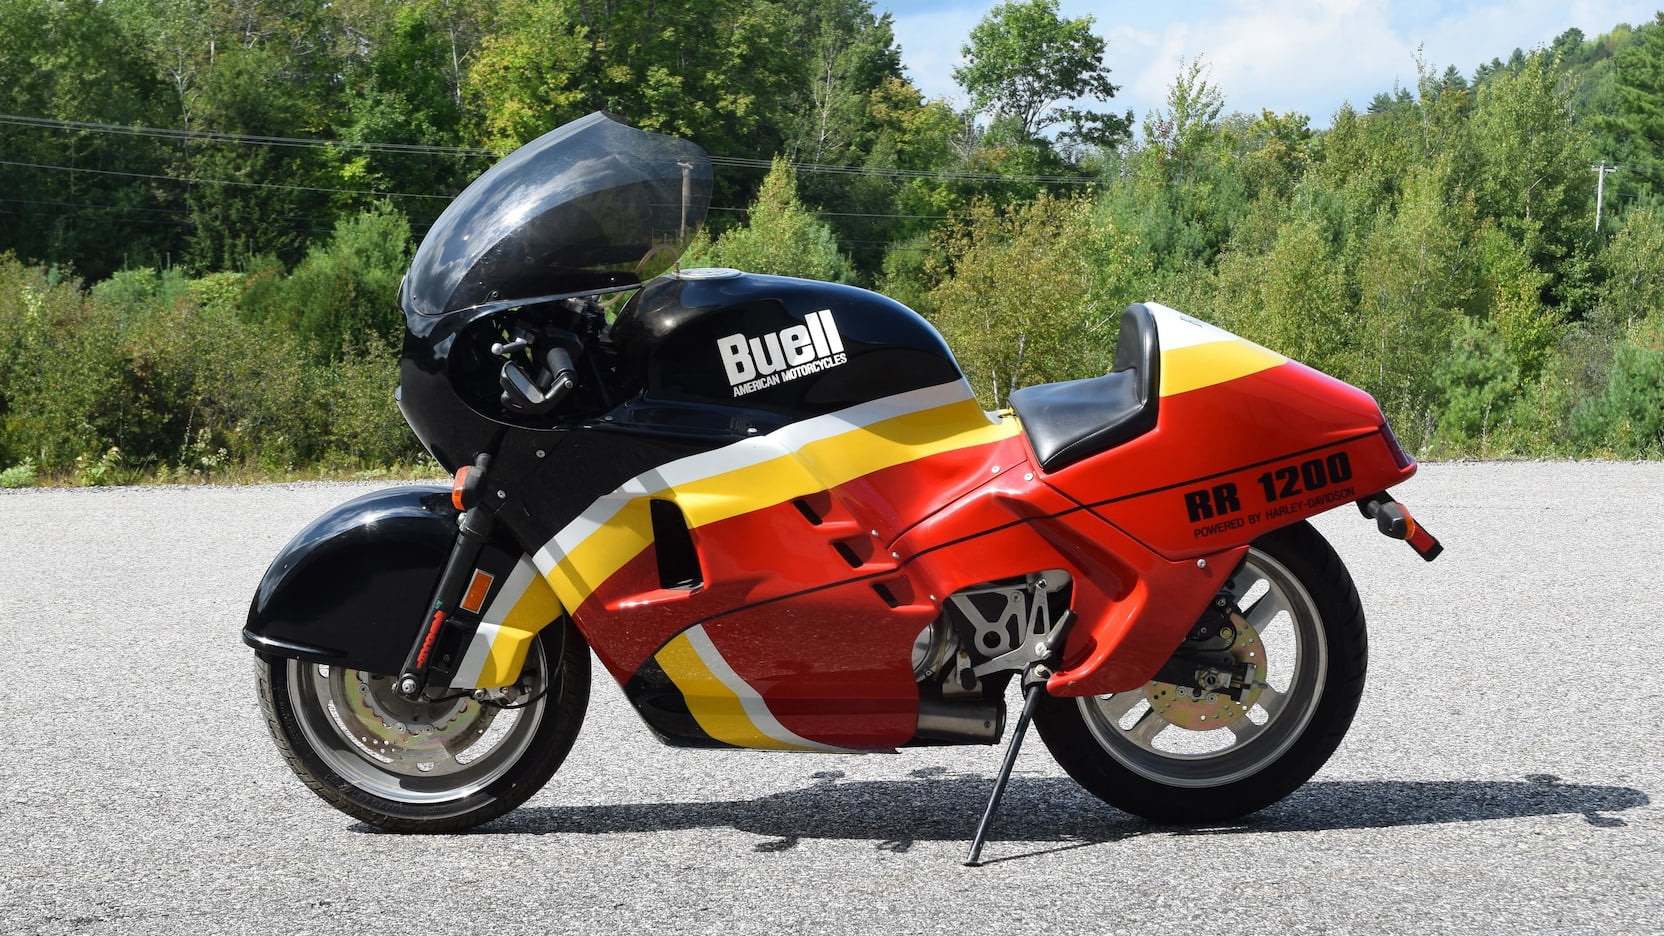 Buell RR1200 "Powered by Harley-Davidson"